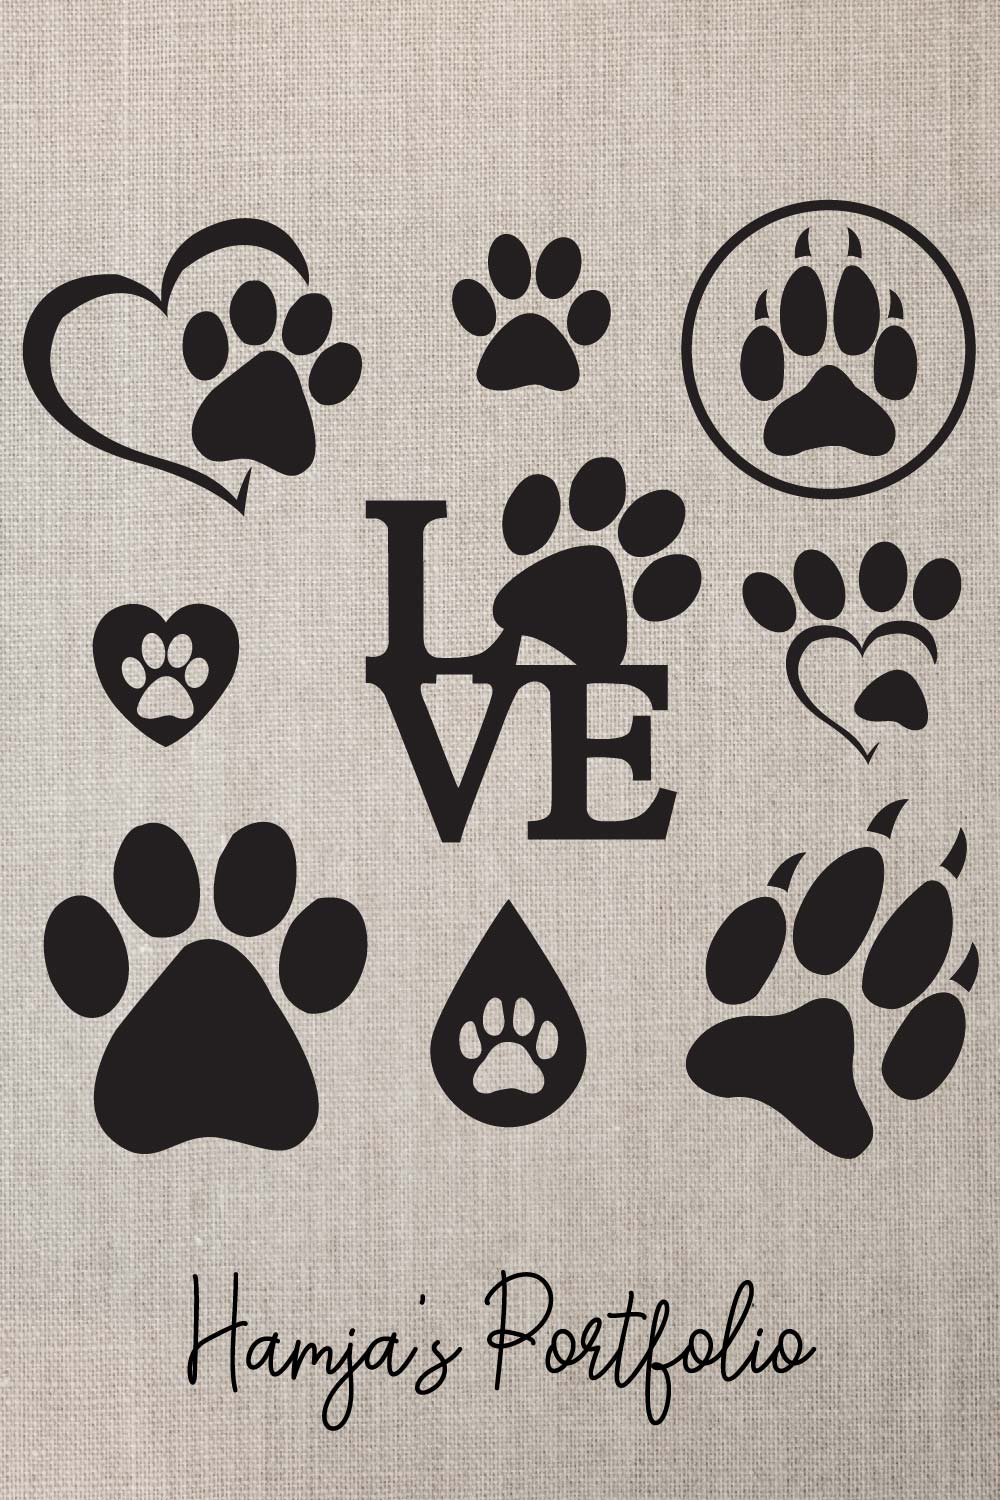 Pawprint pinterest preview image.